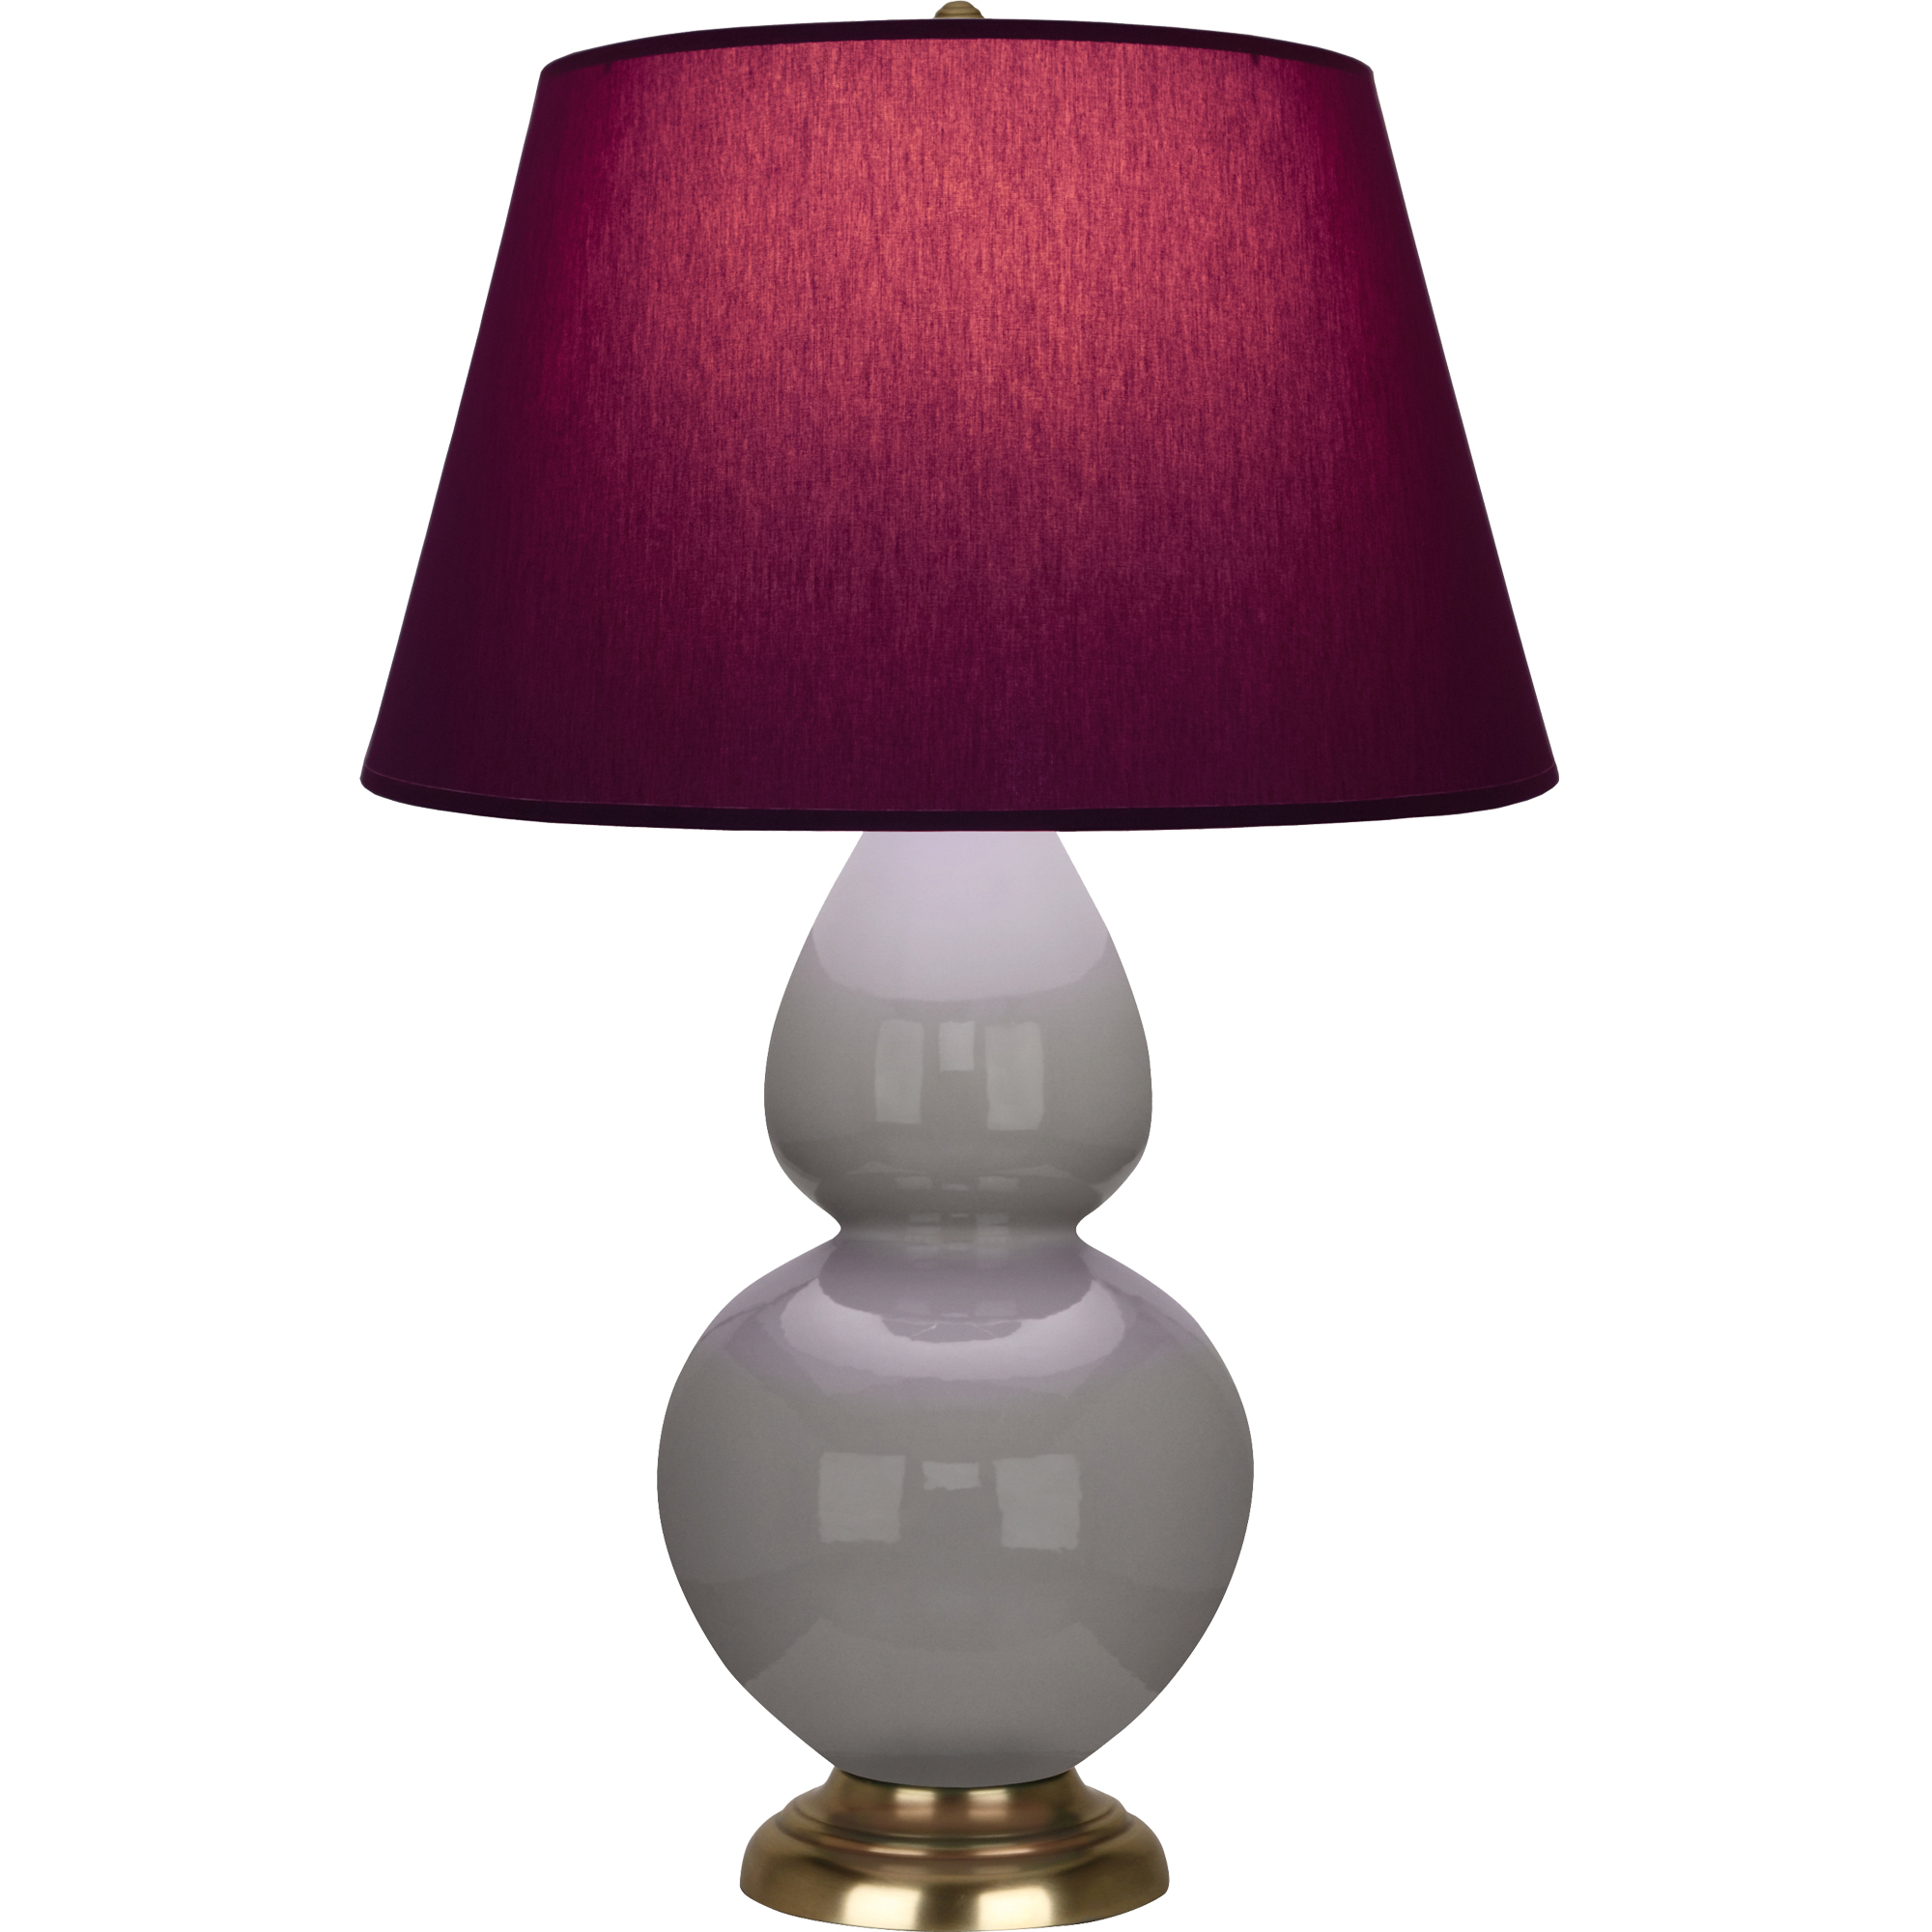 Double Gourd Table Lamp Style #1748P